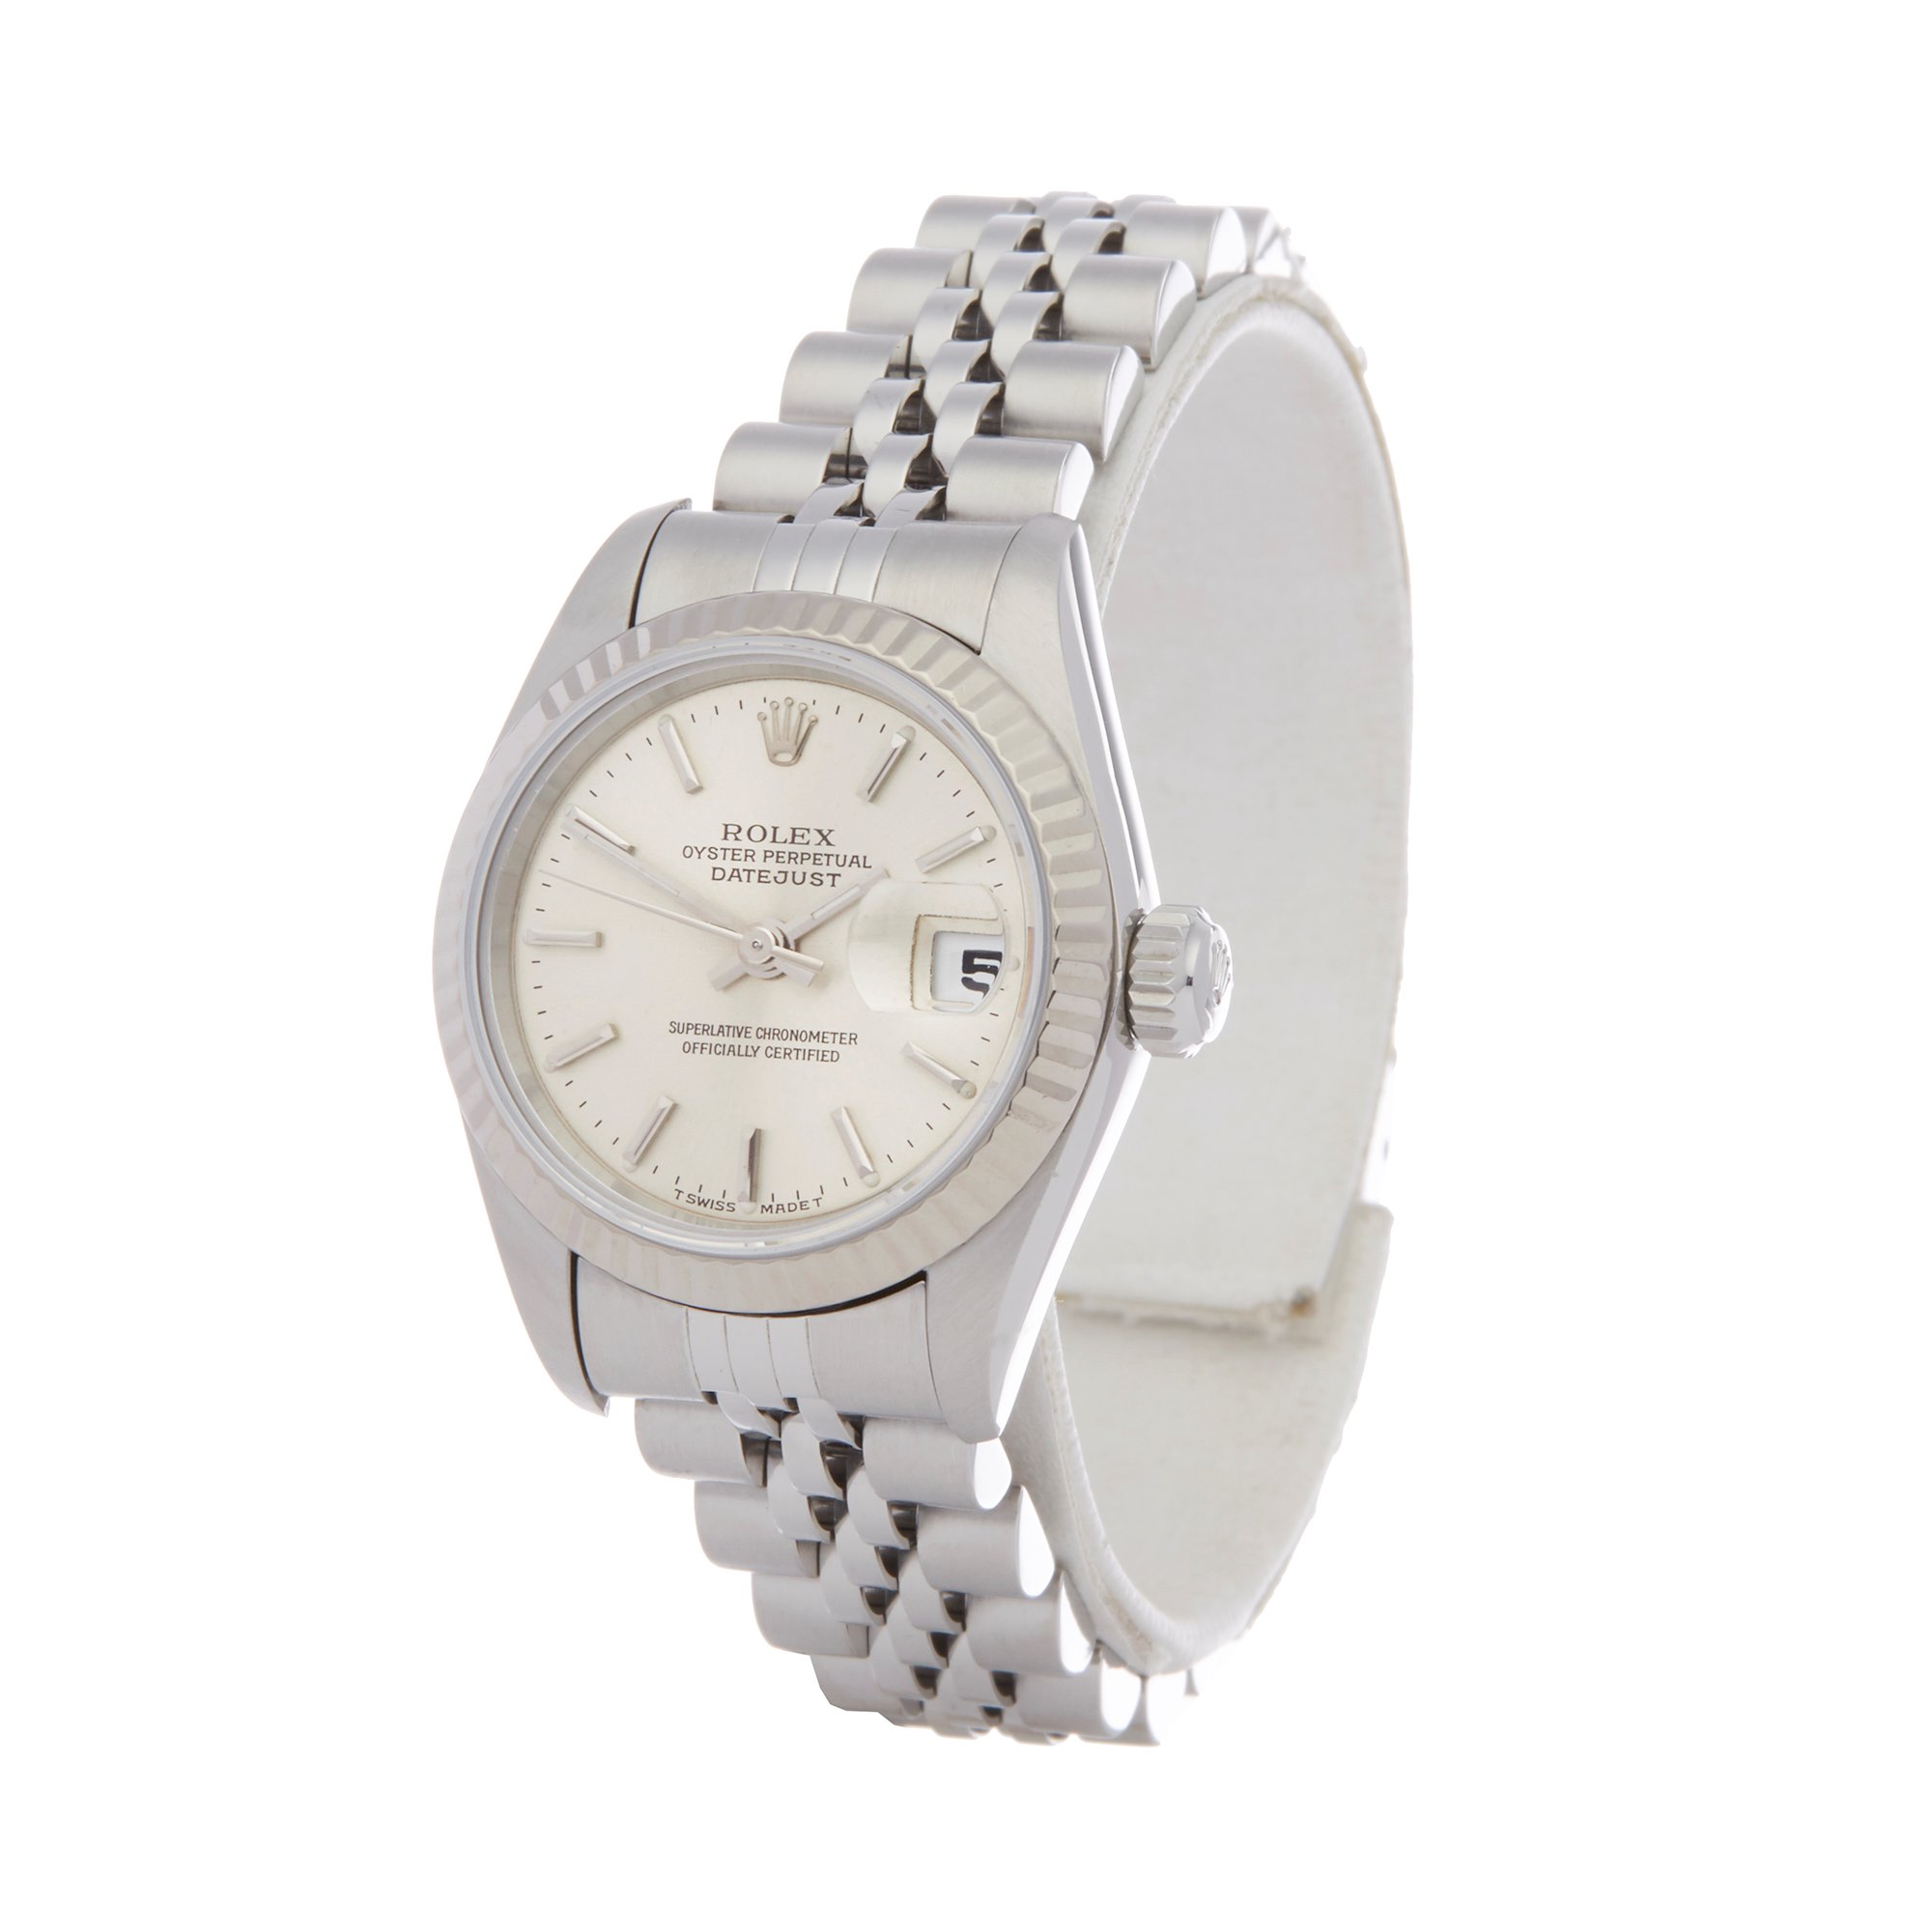 Rolex Datejust 26 69174 Ladies Stainless Steel Watch - Image 7 of 7